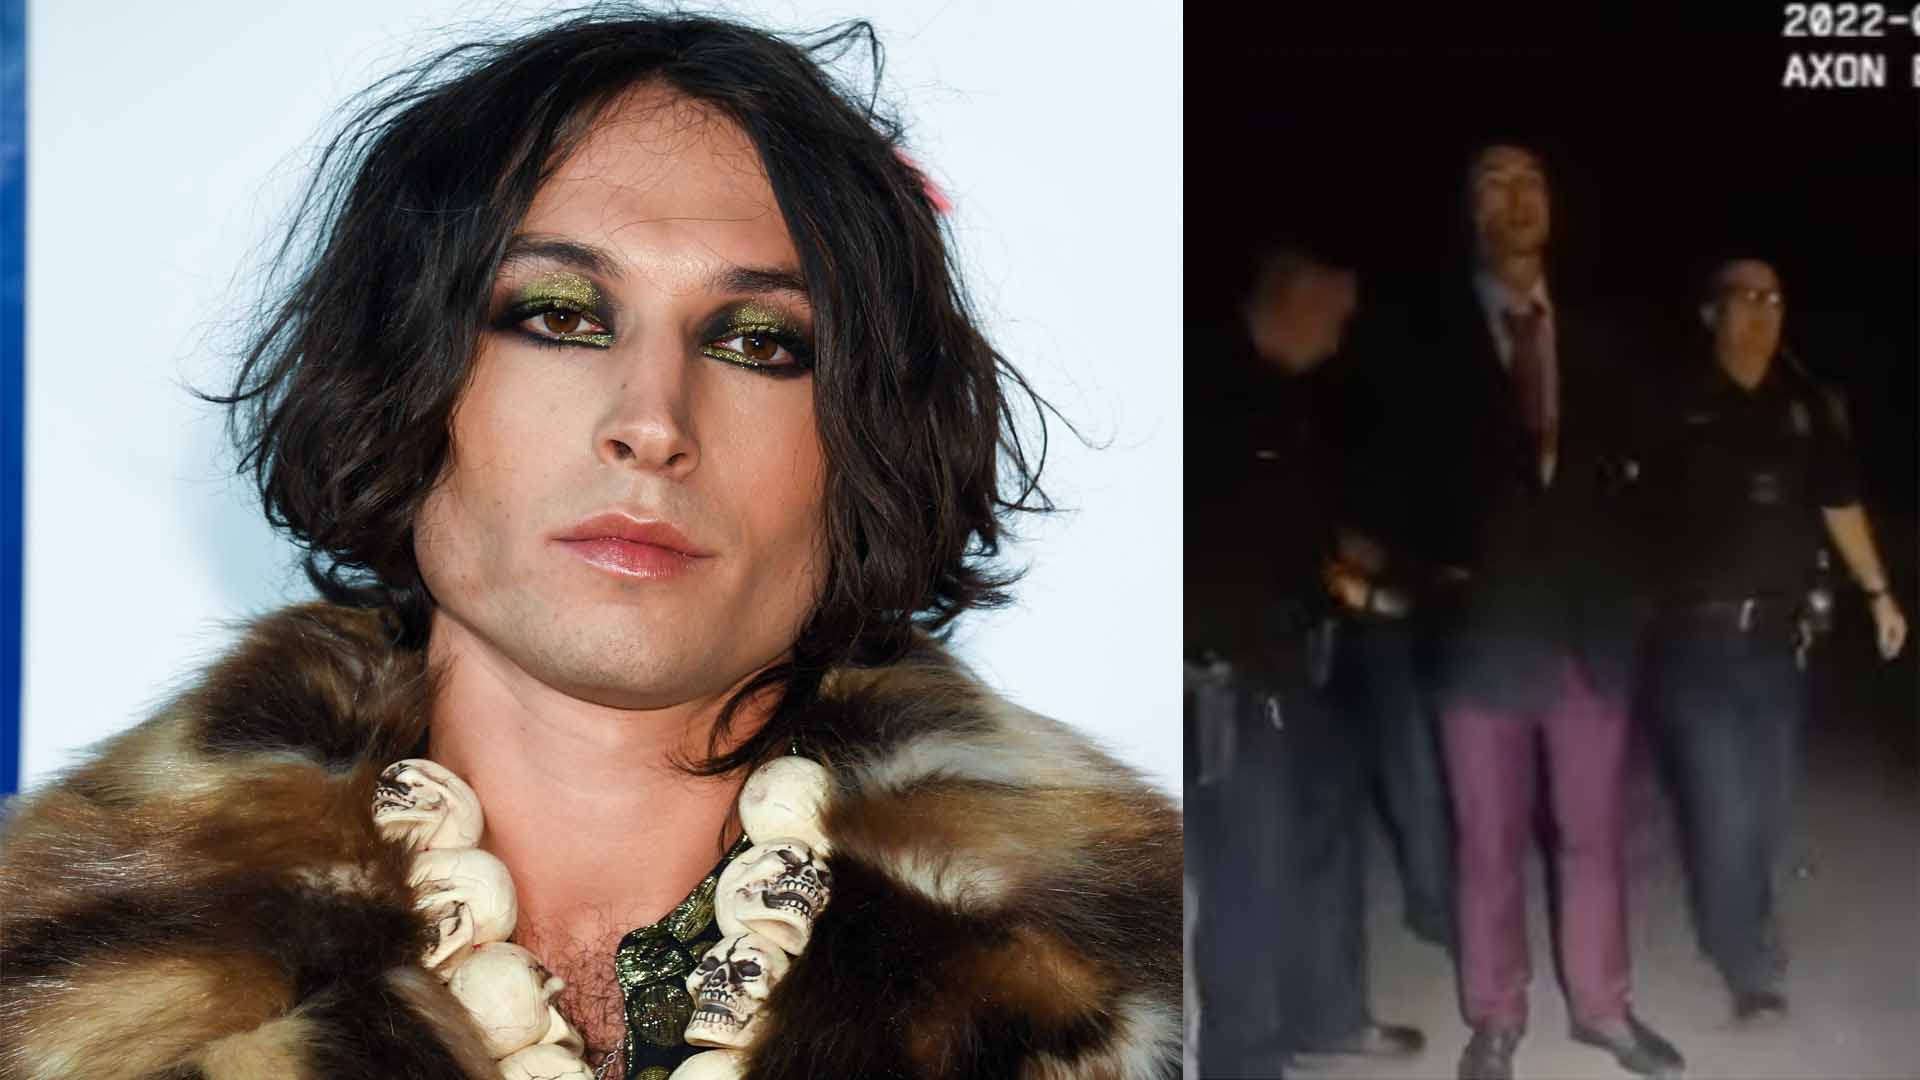 Ezra Miller Gets Verbally Abusive With Hawaii Police In Arrest Body Cam Video Footage, Claims Assaults Were Filmed For NFT Crypto Art 